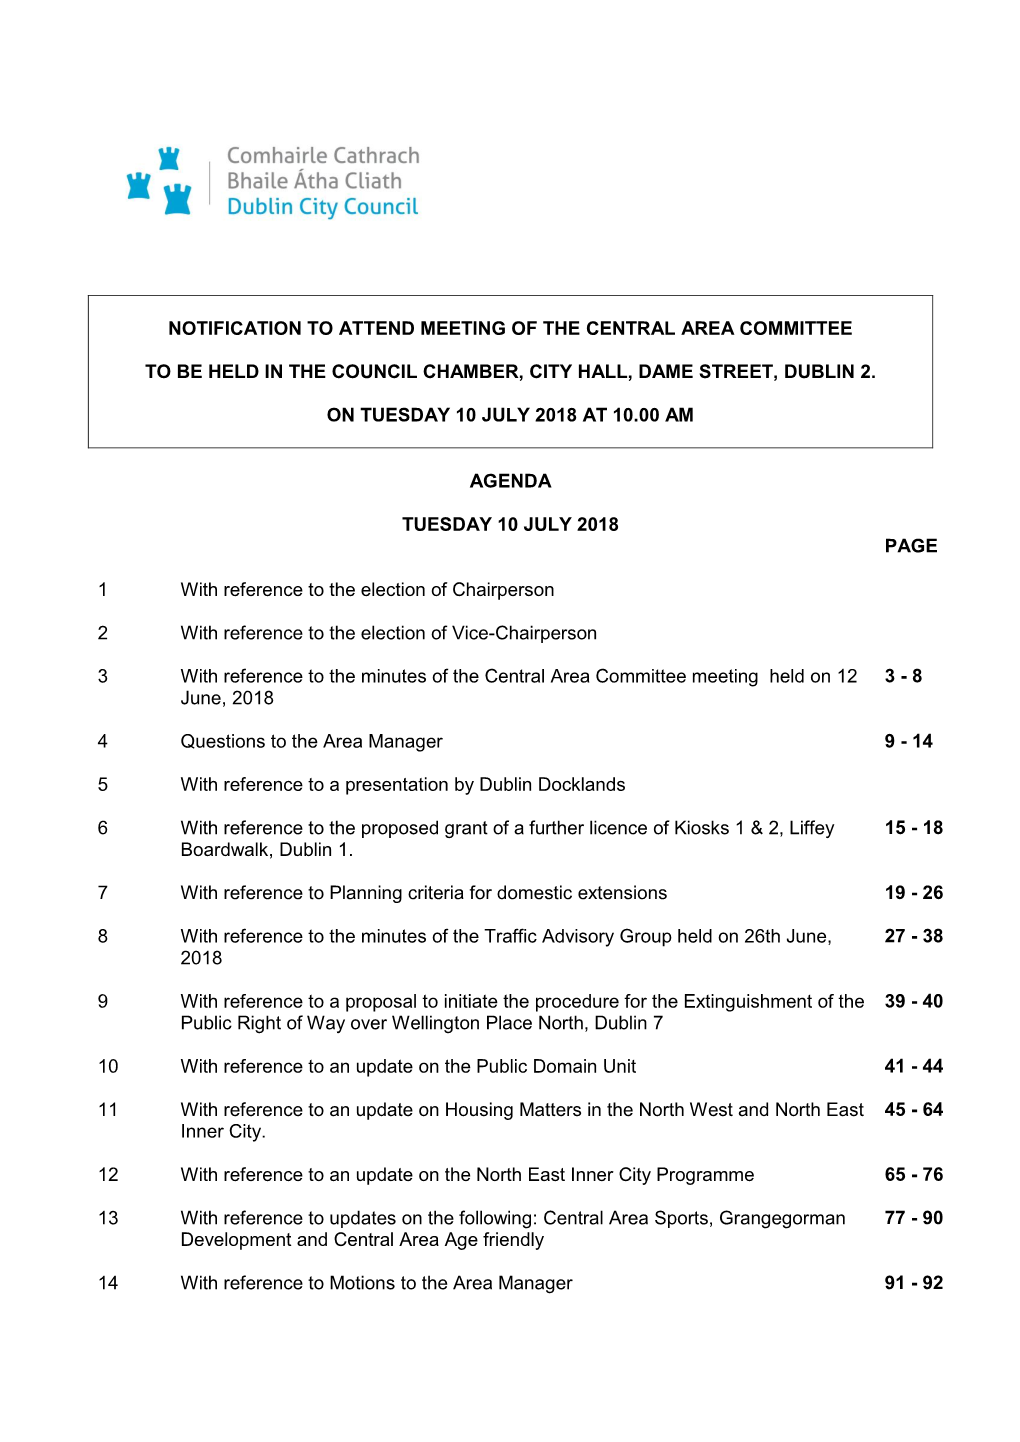 Agenda Document for Central Area Committee, 10/07/2018 10:00